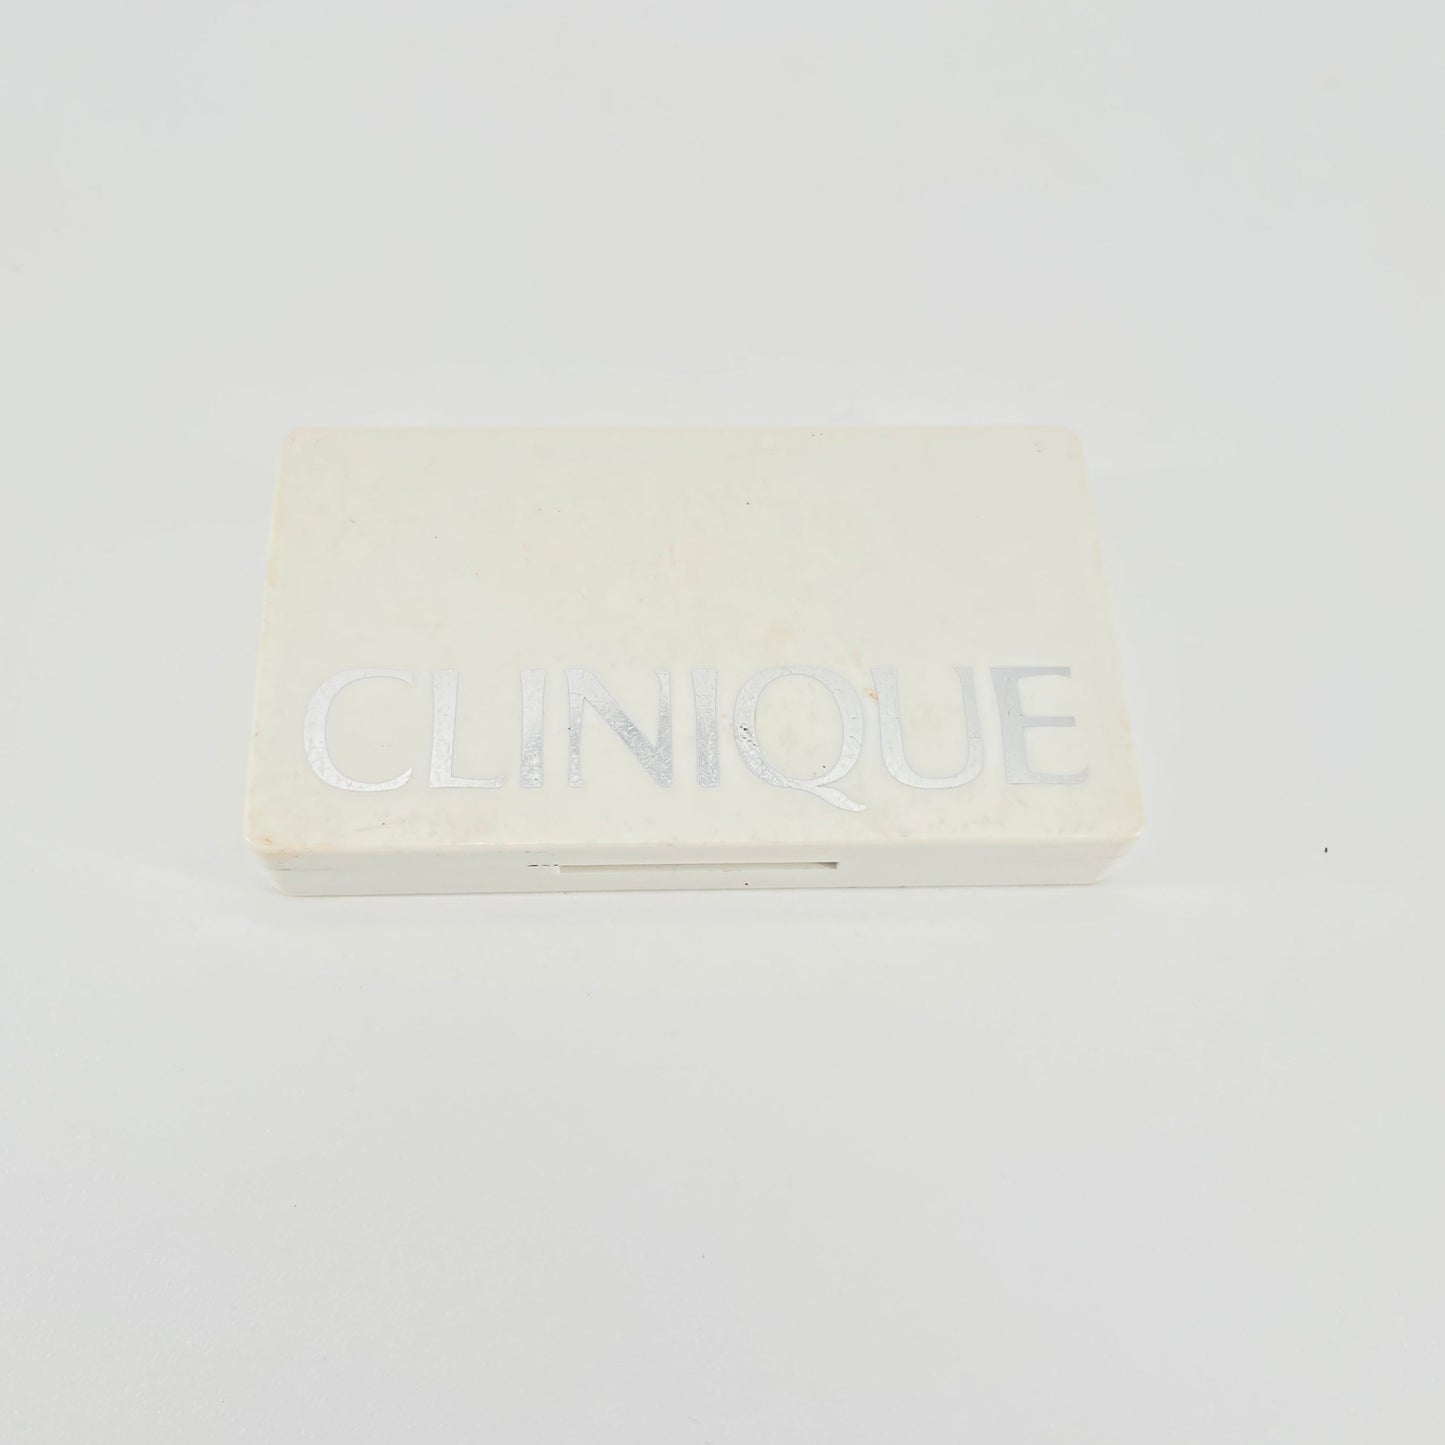 Clinique All About Shadow Quad with Mirror (Travel Size)